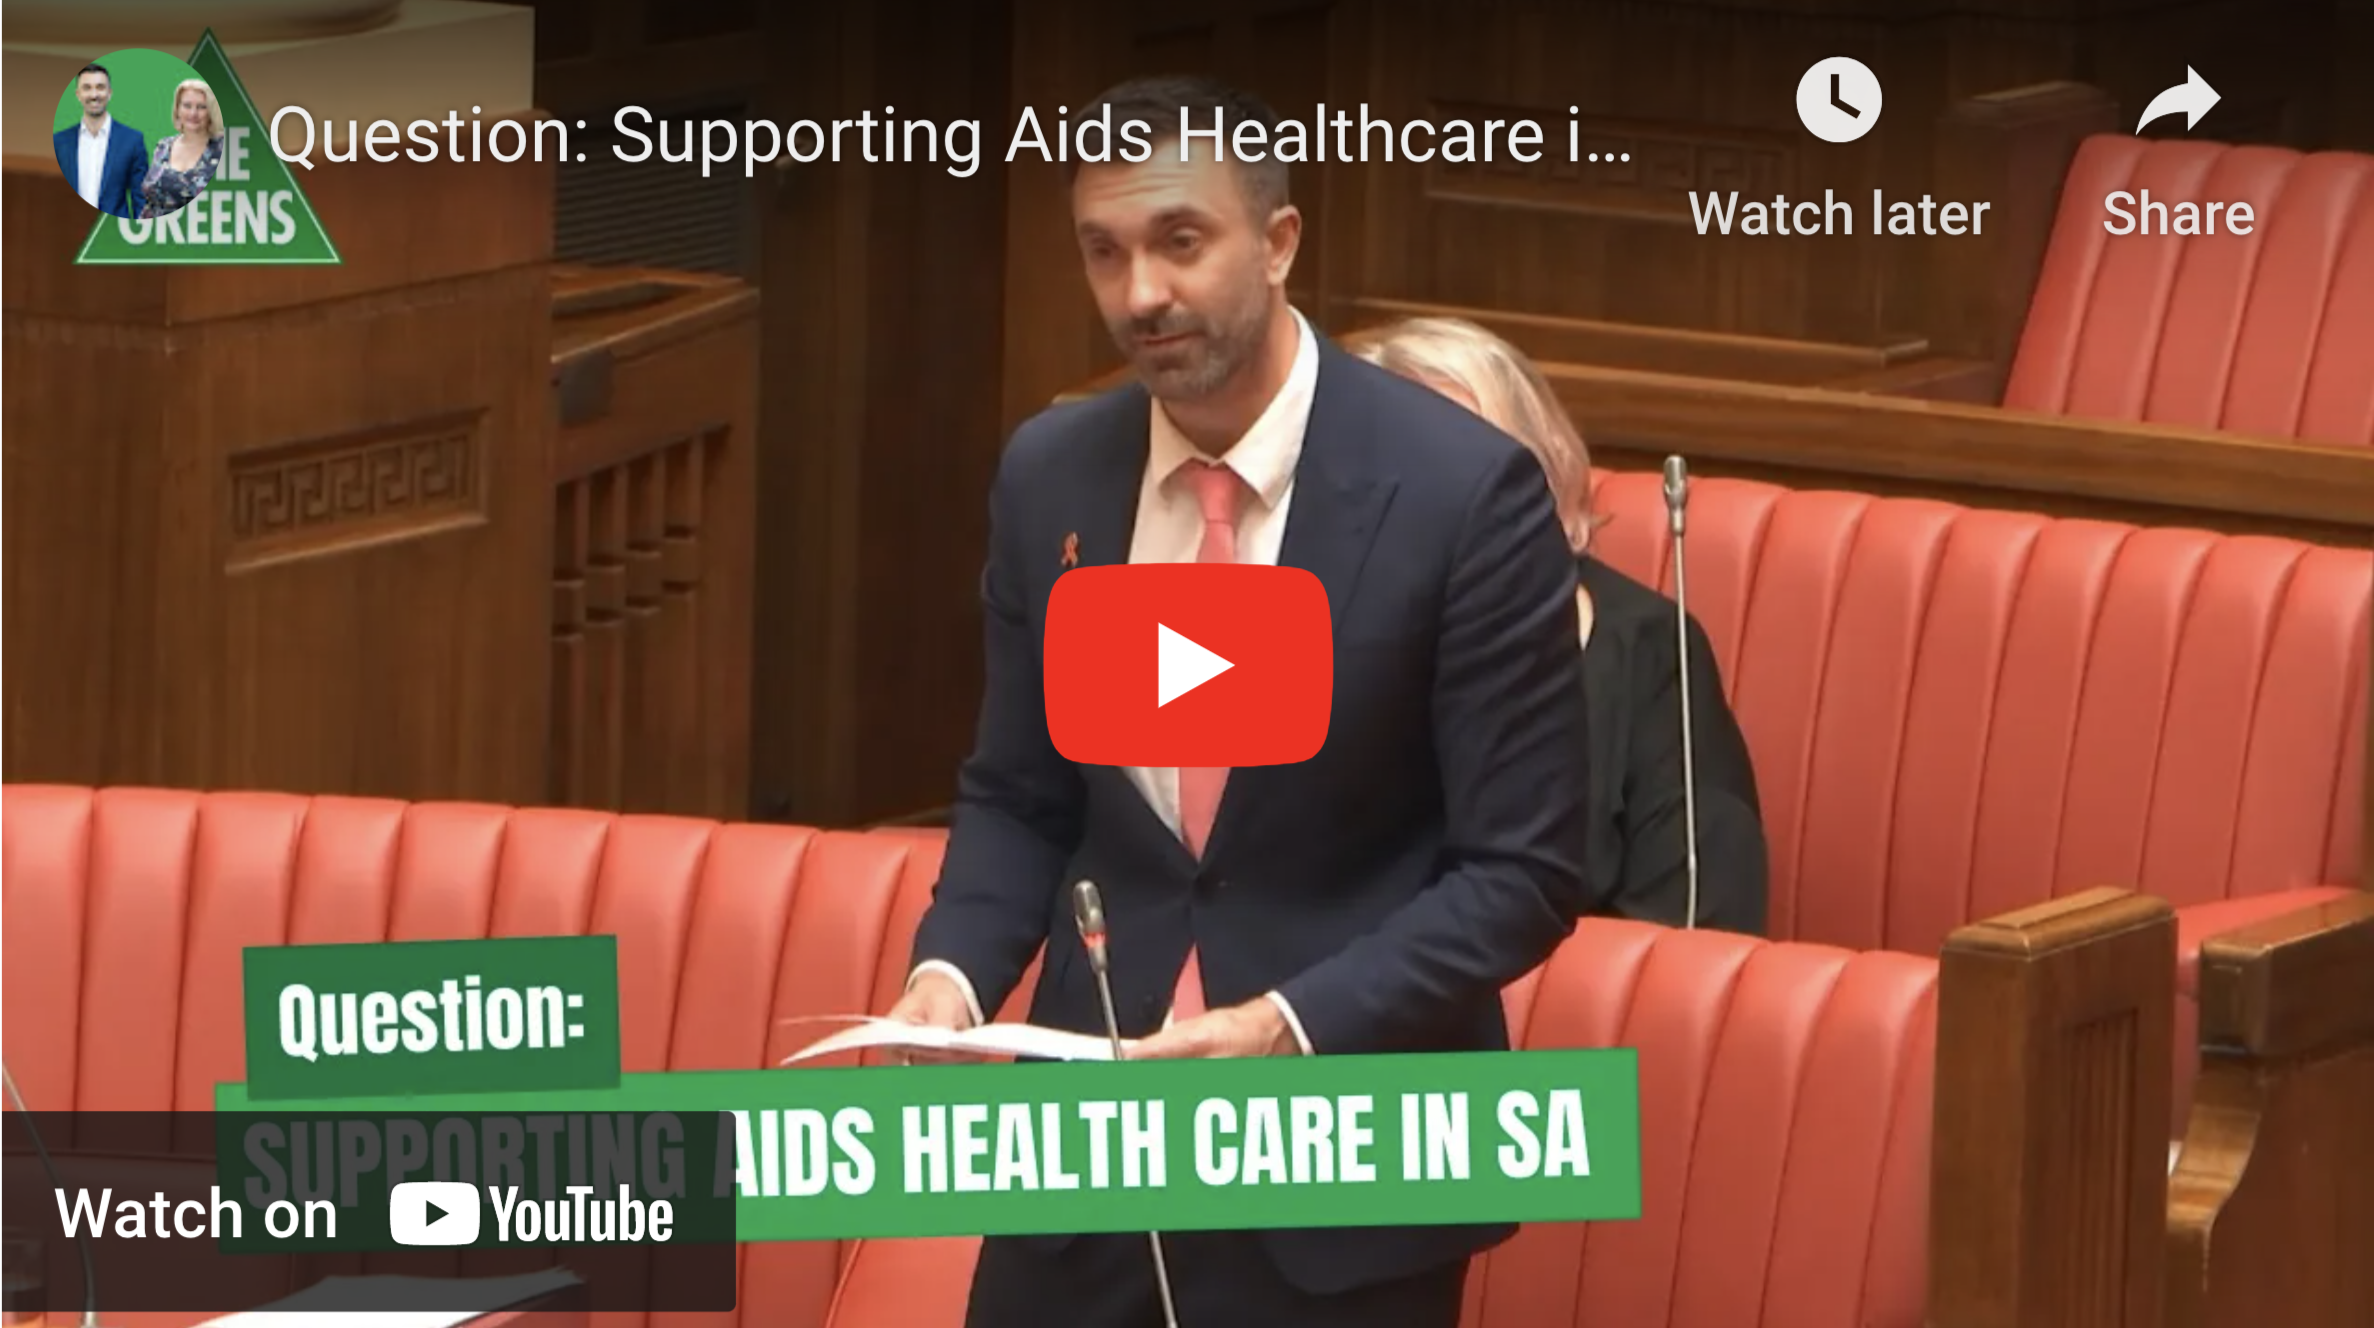 Supporting AIDS Healthcare